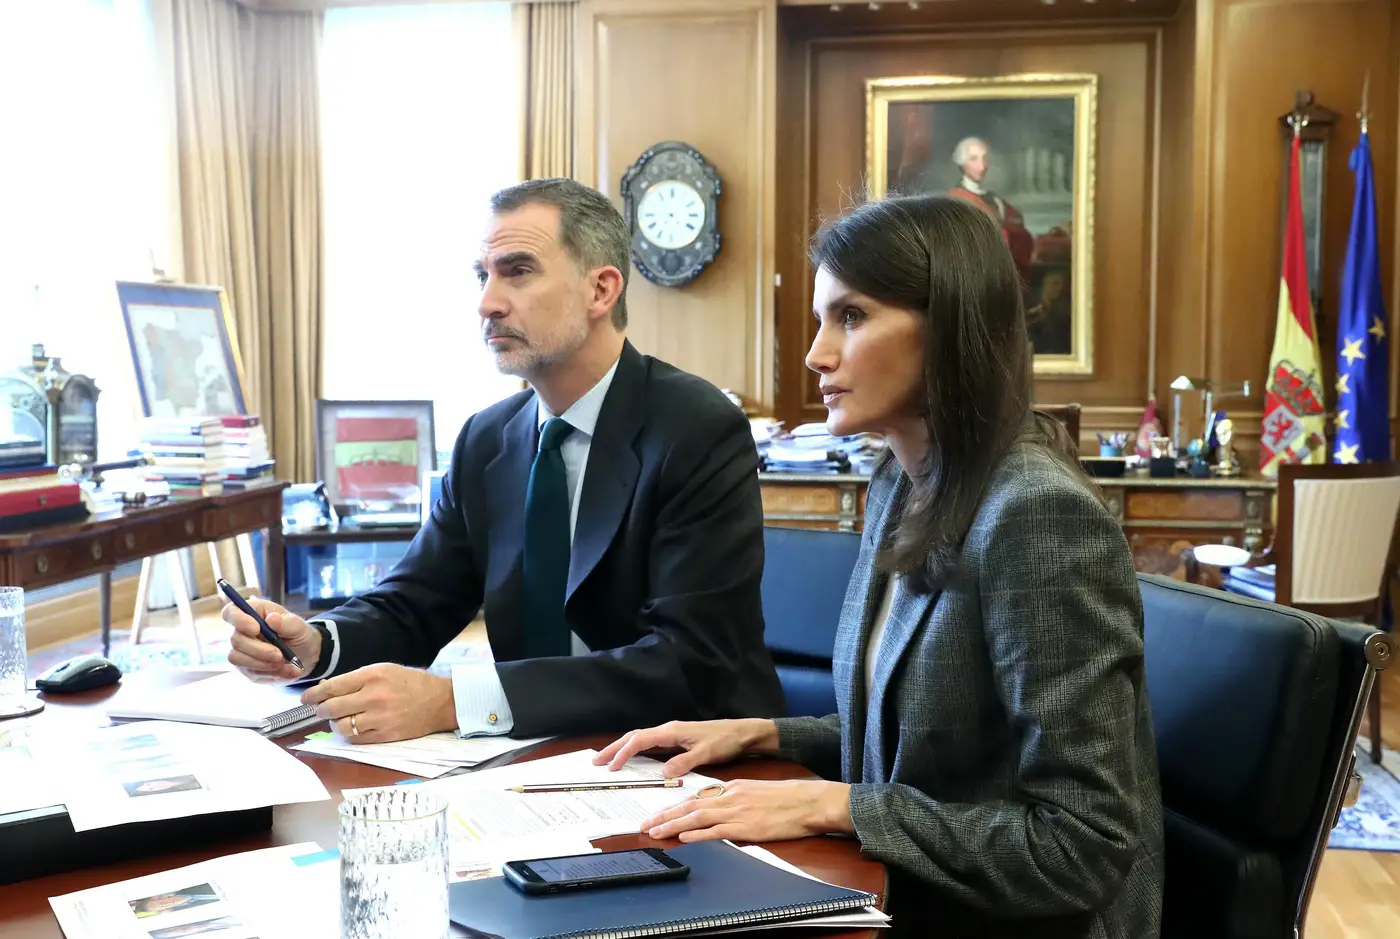 Felipe and Letizia attended a video conference with officials of the World Health Organization